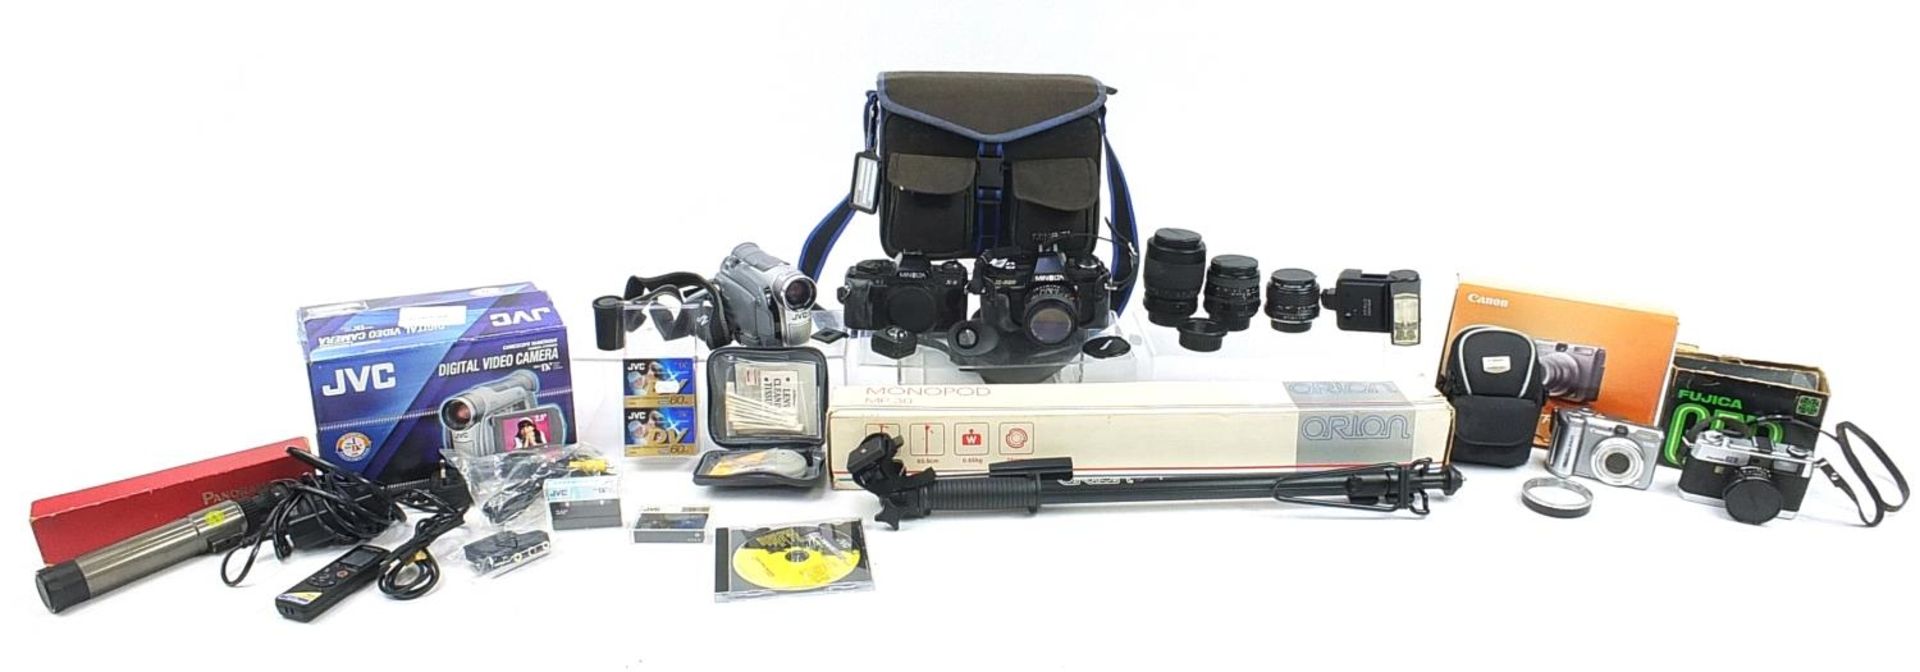 Vintage and later cameras, lenses and accessories including Minolta X-9, Minolta X-300 and Canon